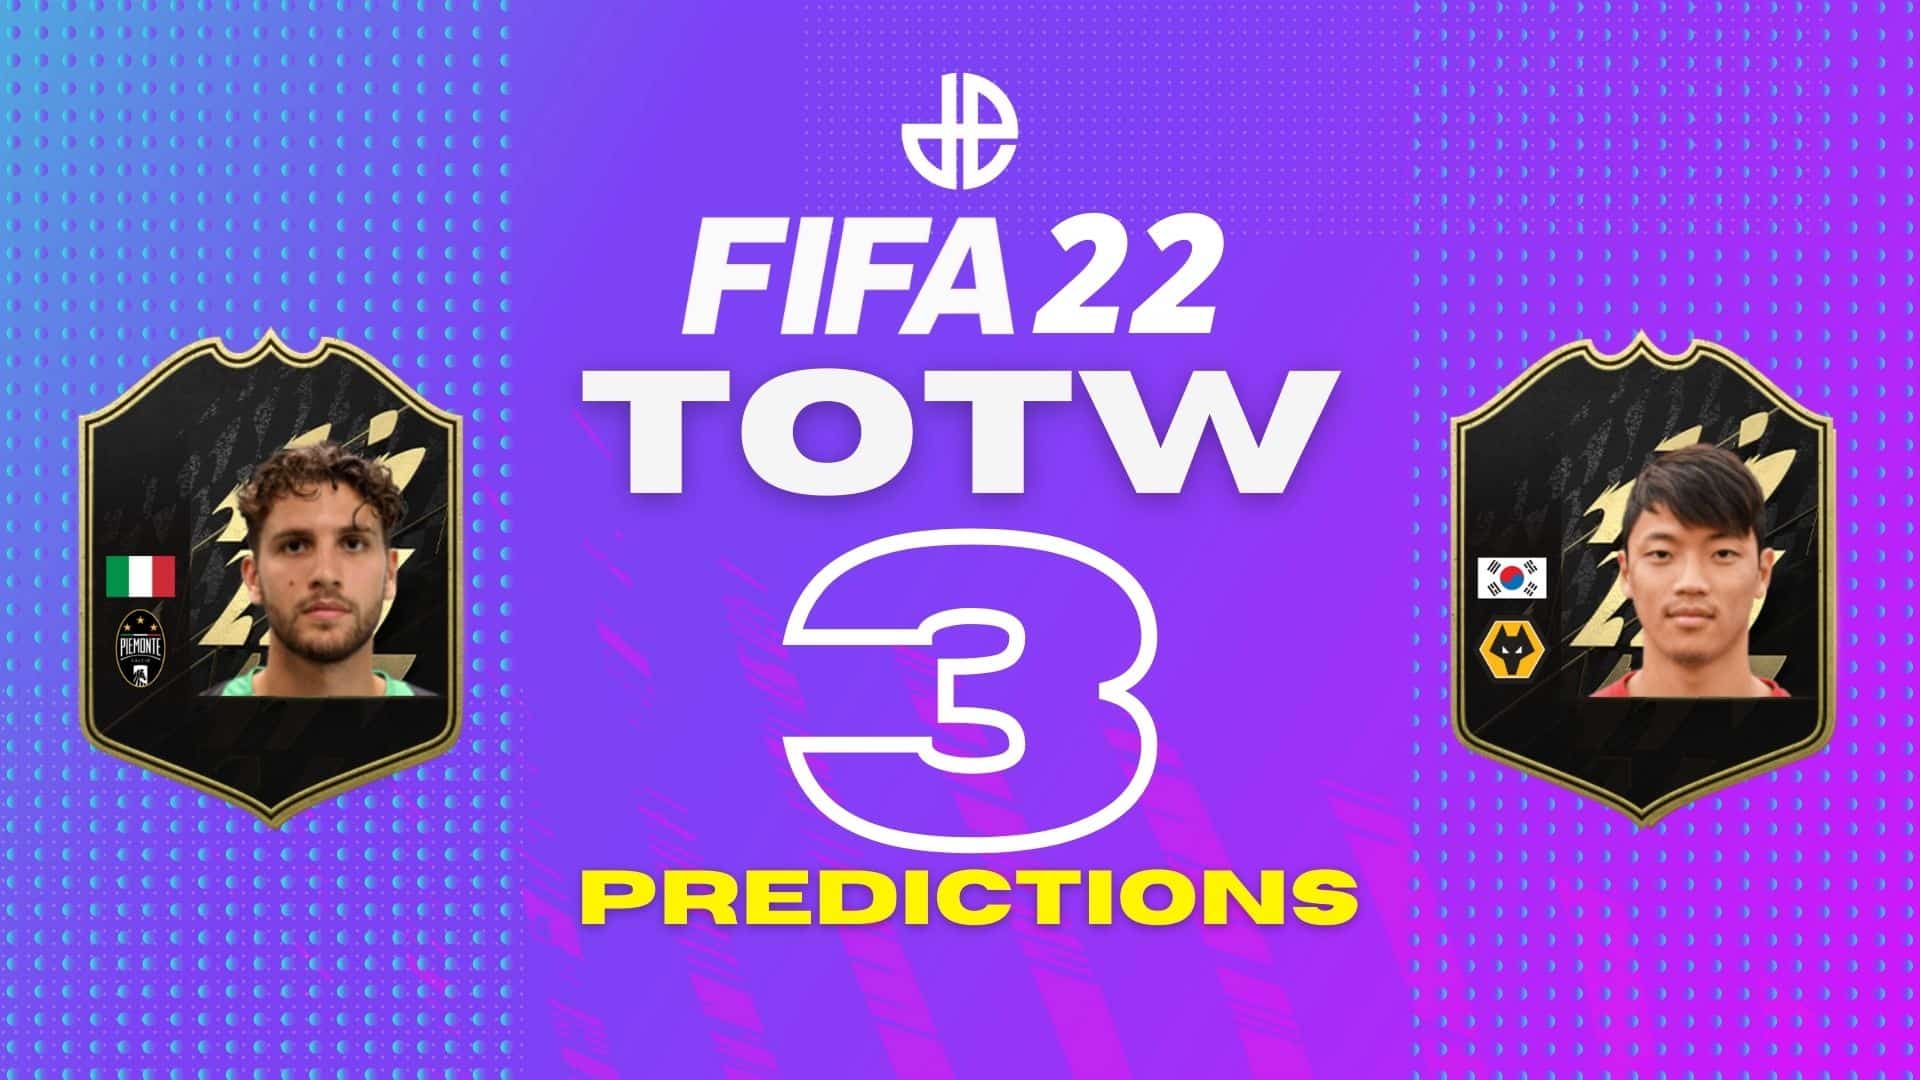 FIFA 22 TOTW cards for Team of the Week 3